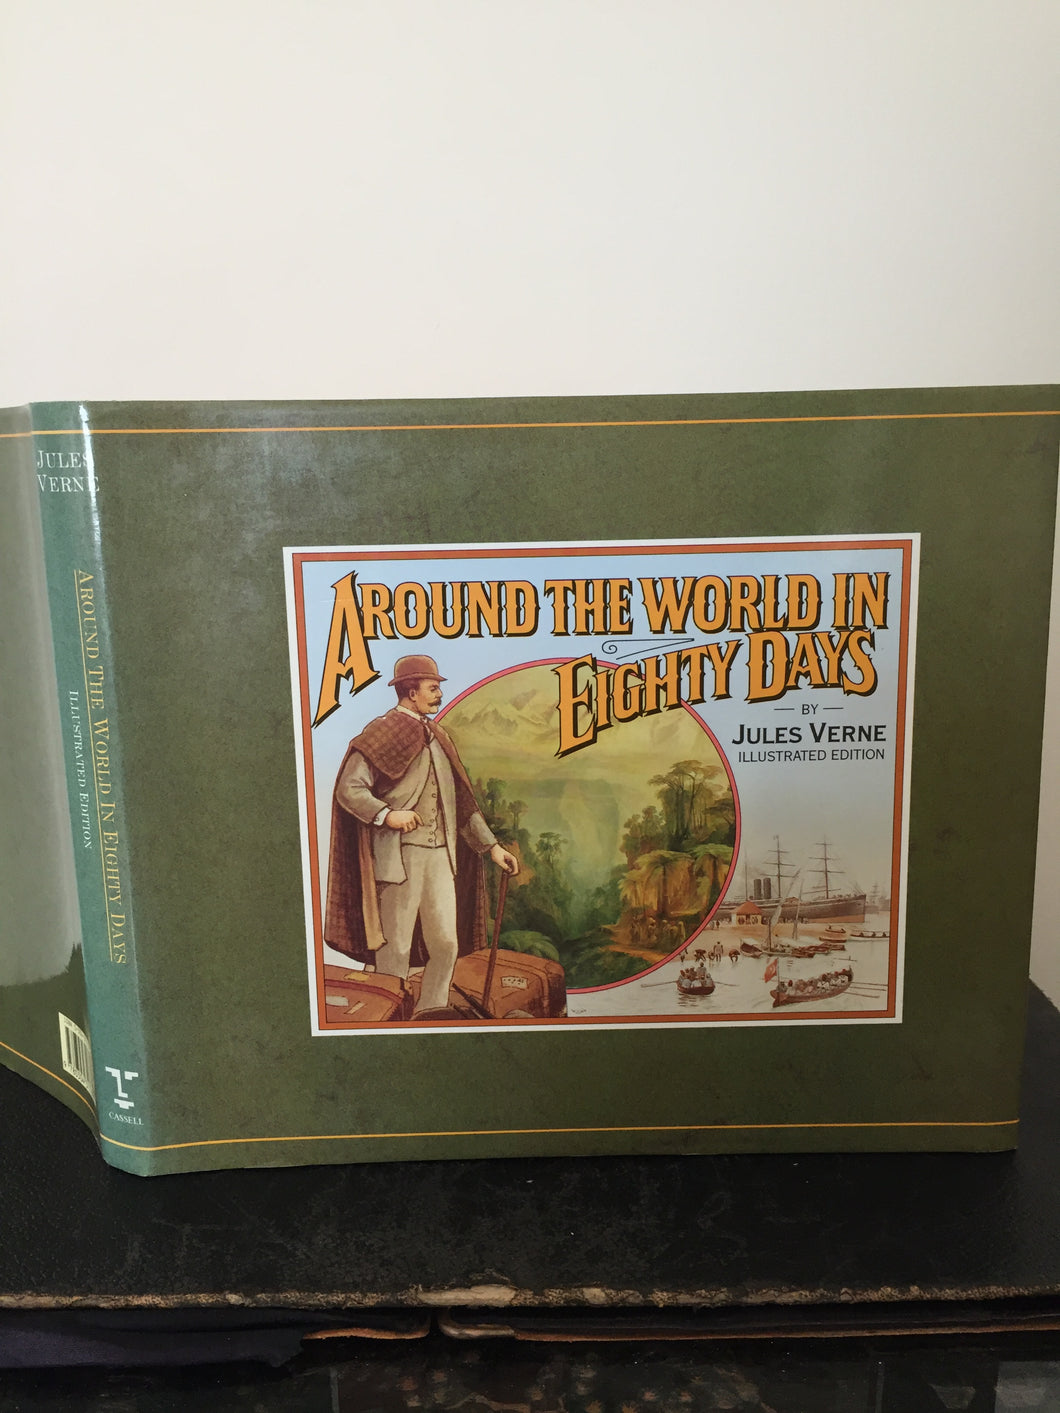 Around The World In Eighty Days. Illustrated Edition